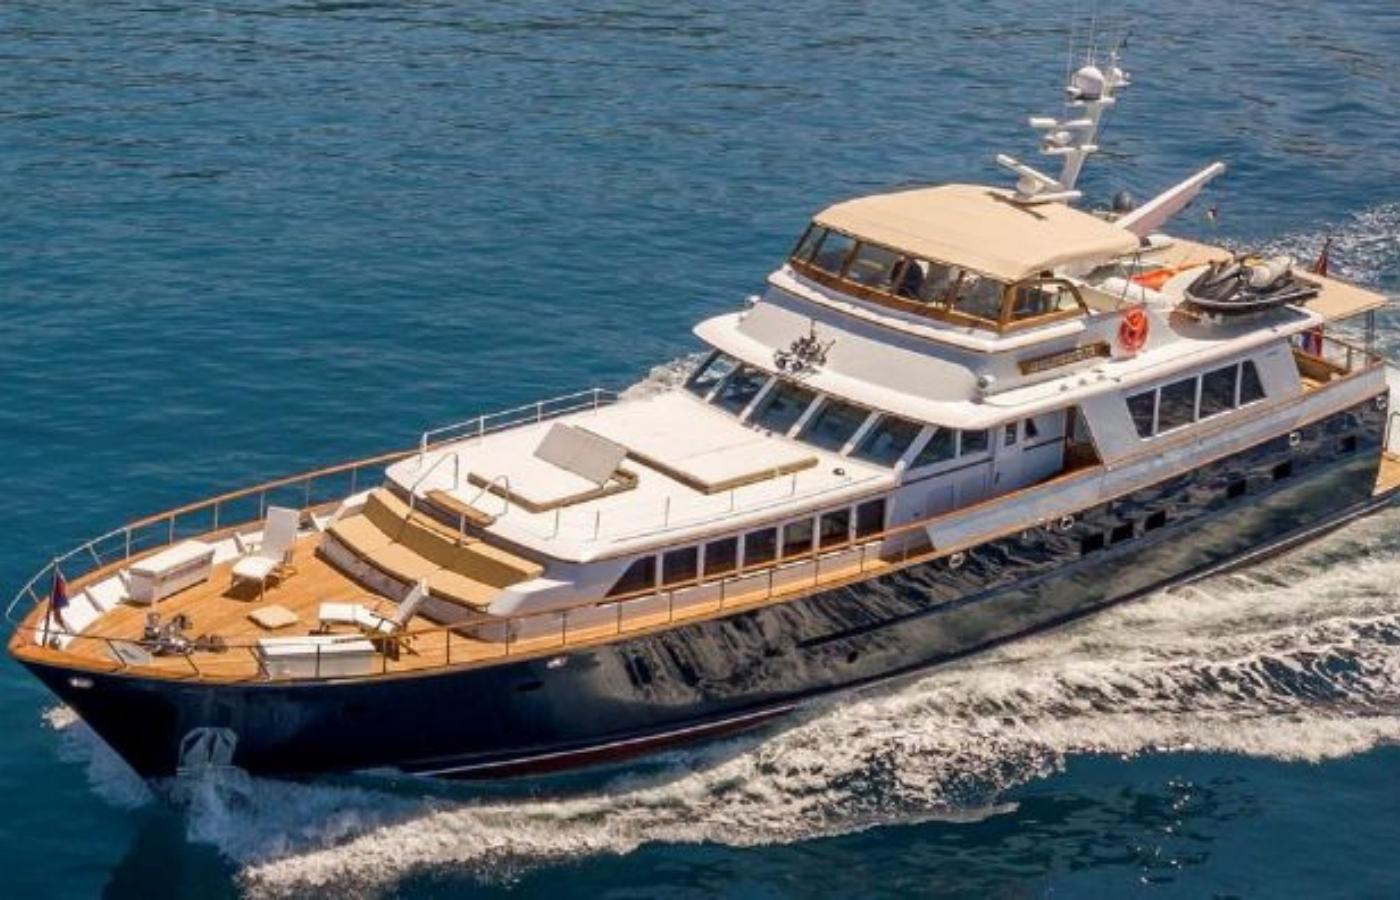 Sold: Burger Boat’s 30m Motor Yacht ADRIATIC ESCAPE [In the News]